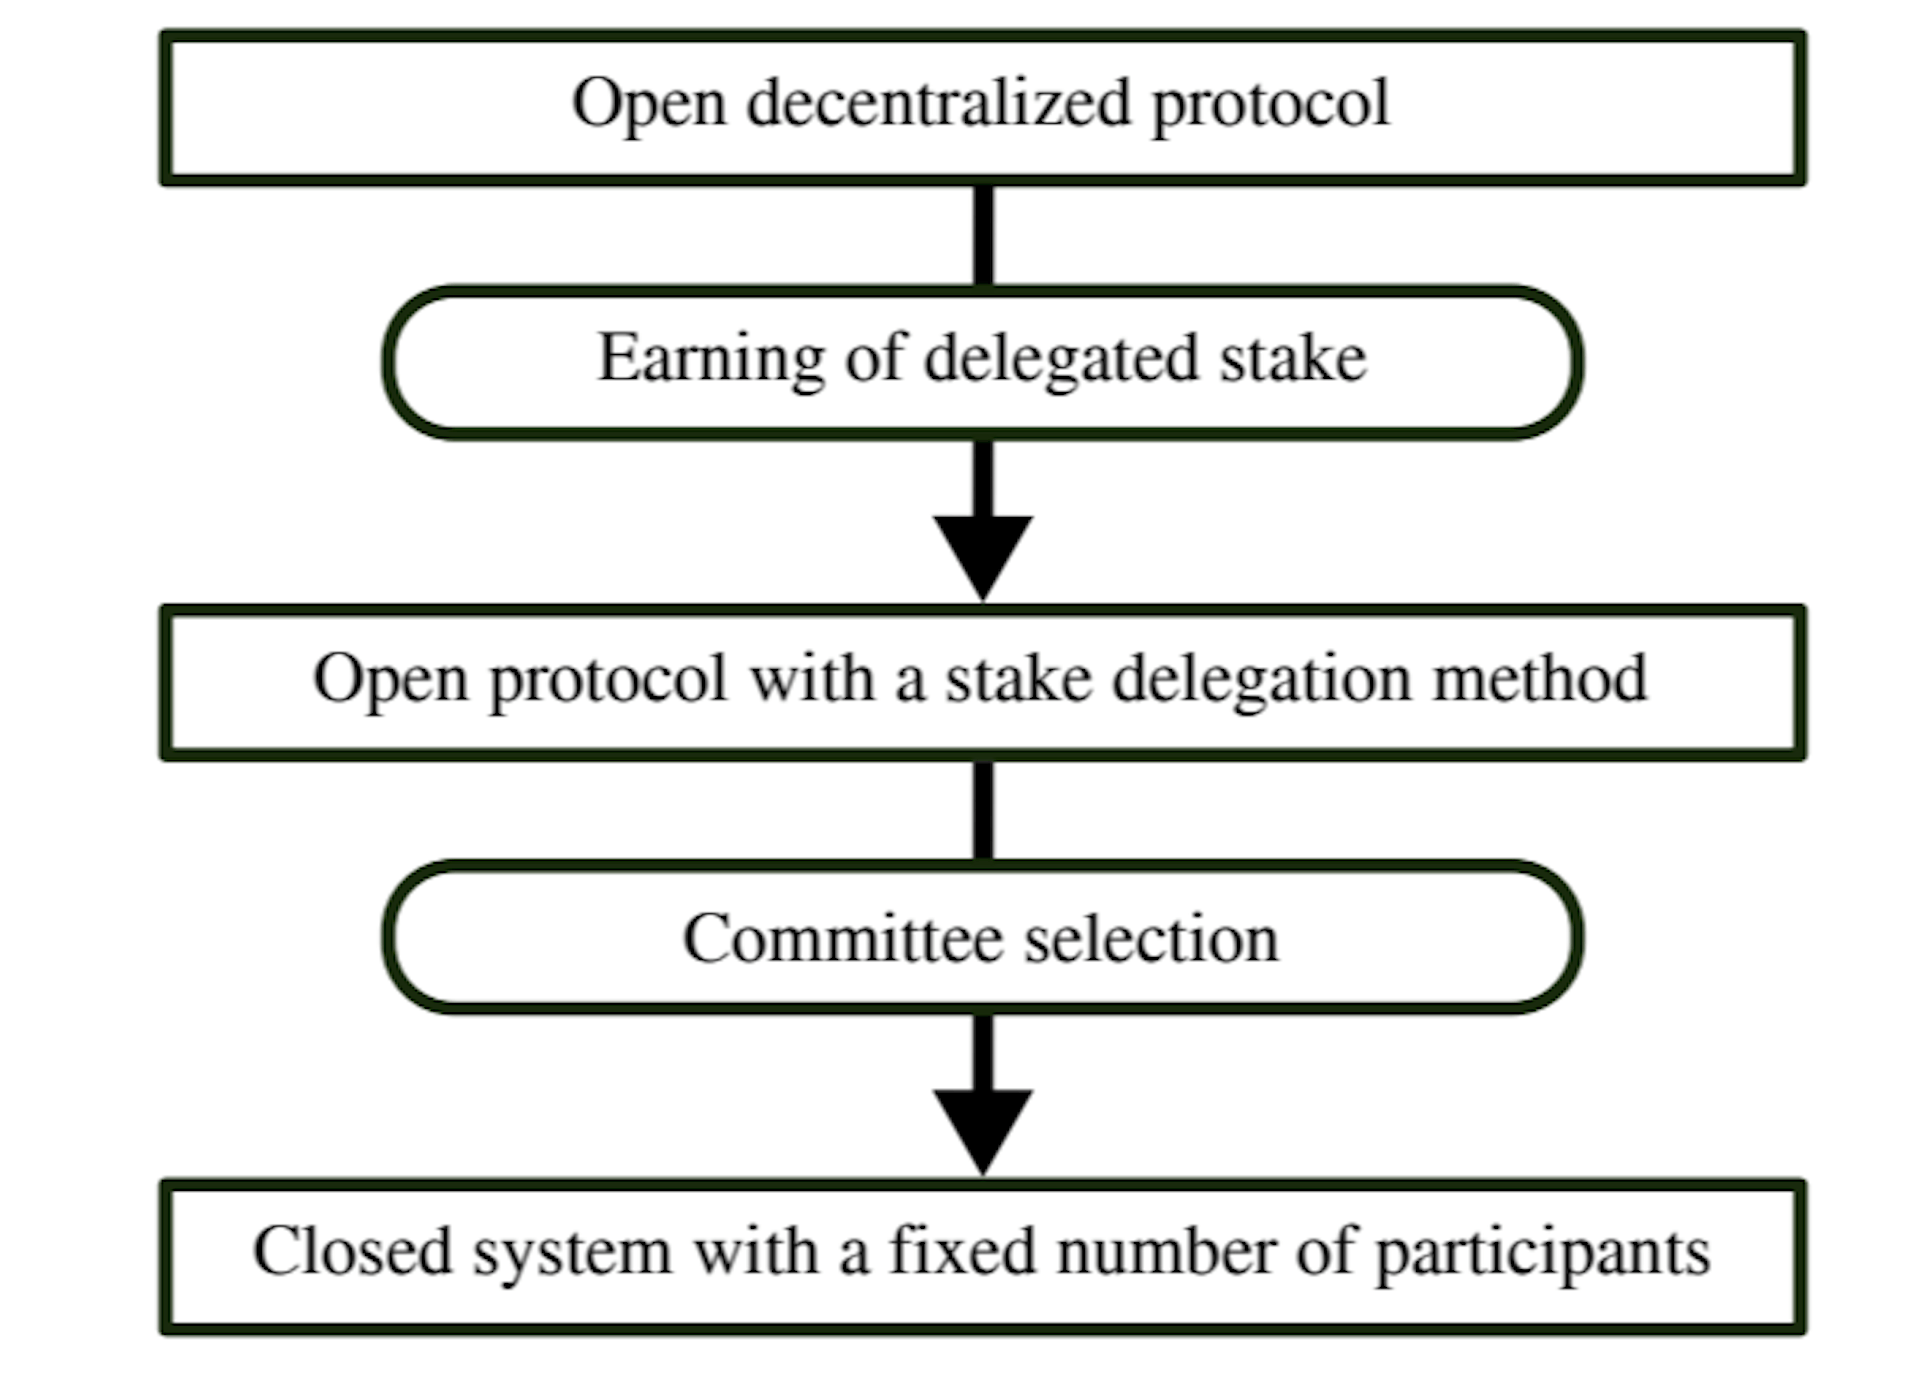 Fig. 1: Process of finding fixed-size closed committee in open permissionless systems with stake delegation.